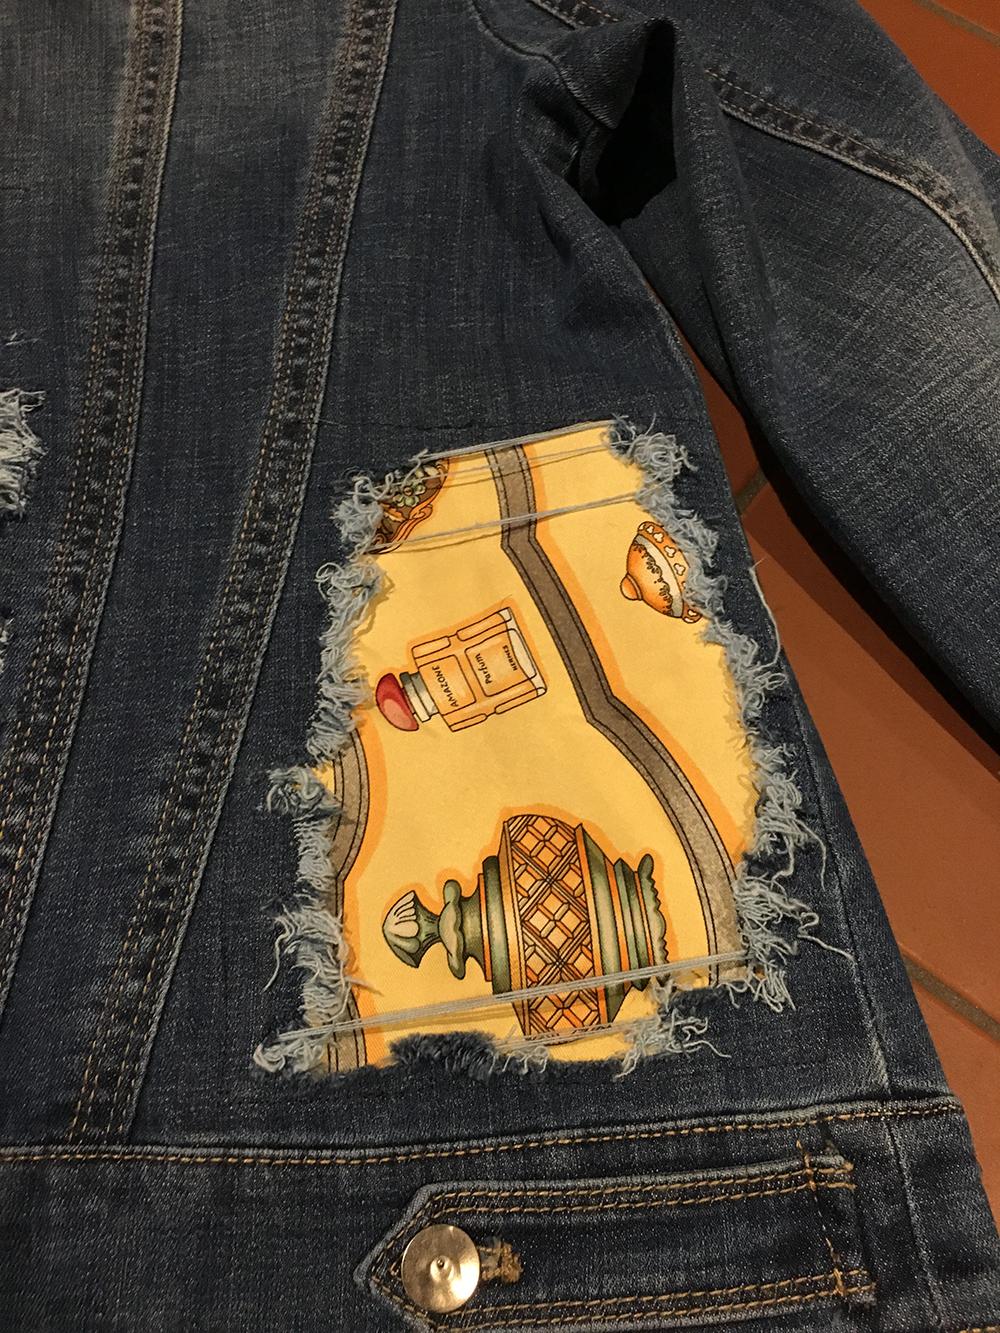 Hermes Qui' Import le Flacons Silk Scarf Distressed Denim Jacket-Medium In New Condition For Sale In Philadelphia, PA